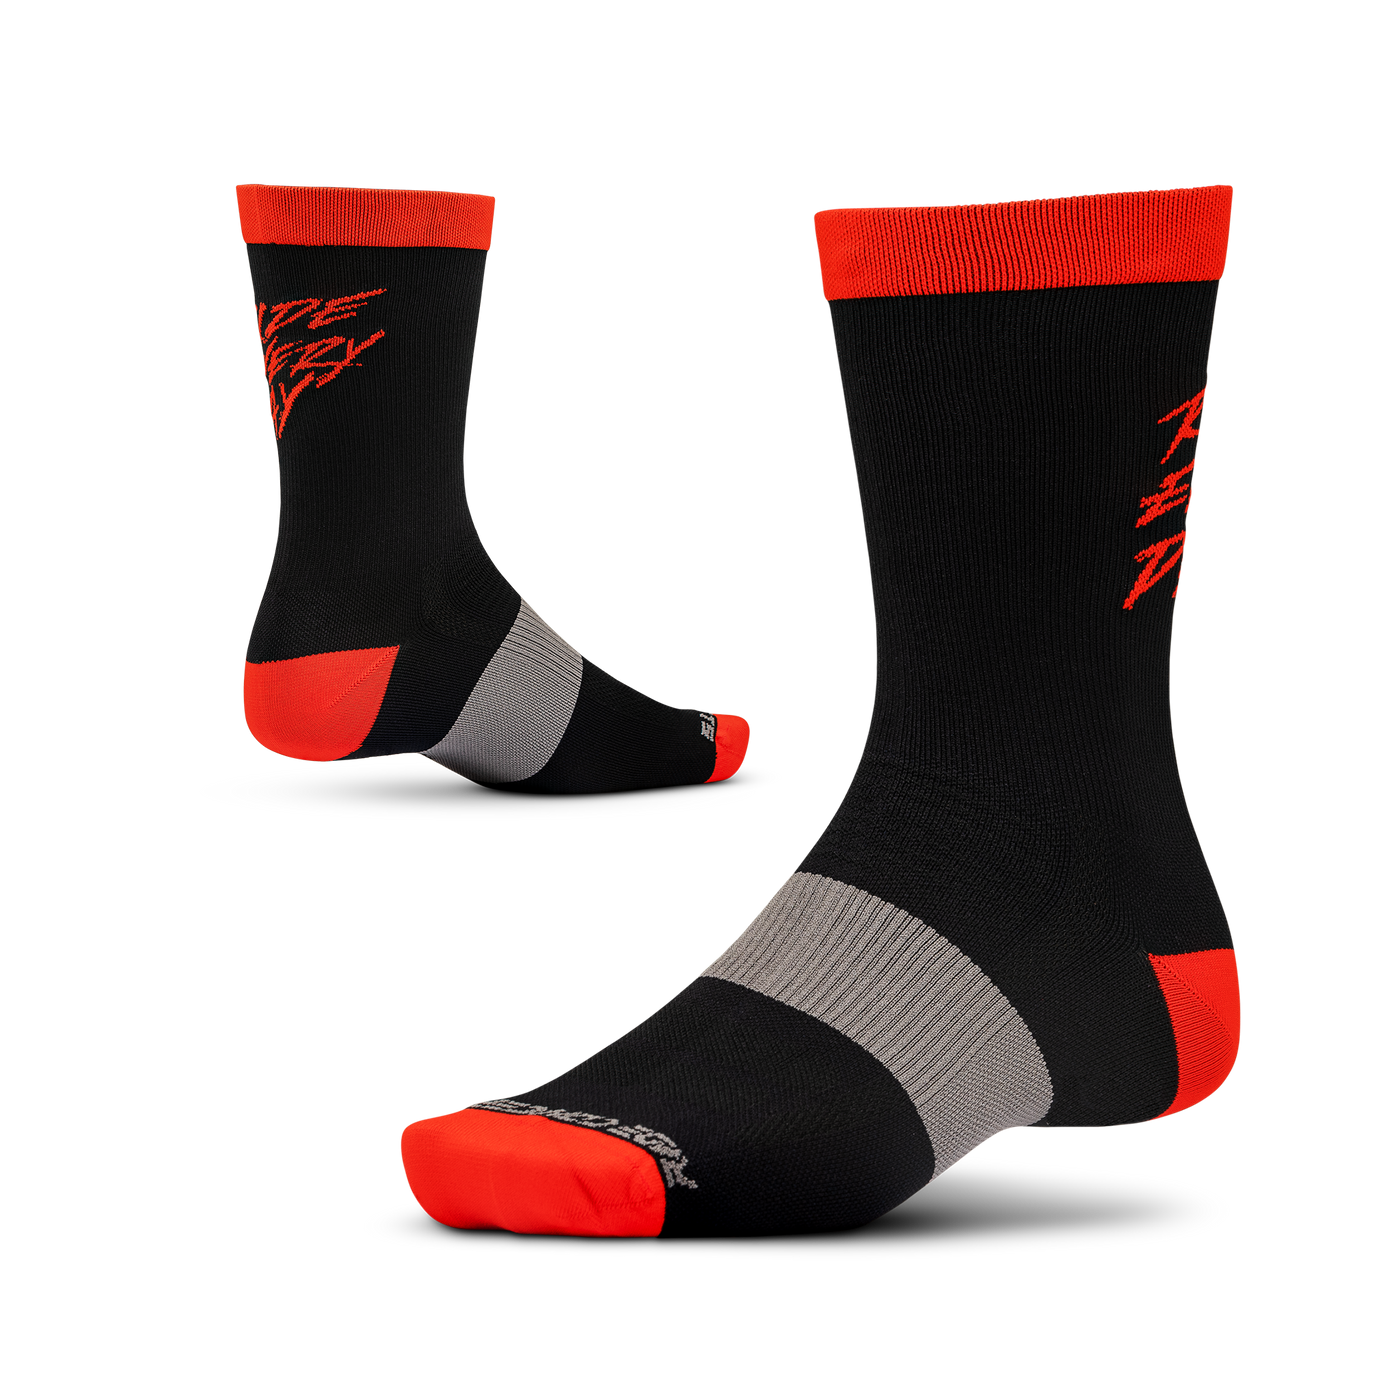 Ride Concepts Ride Every Day MTB Sock - Synthetic 8" - Black and Red